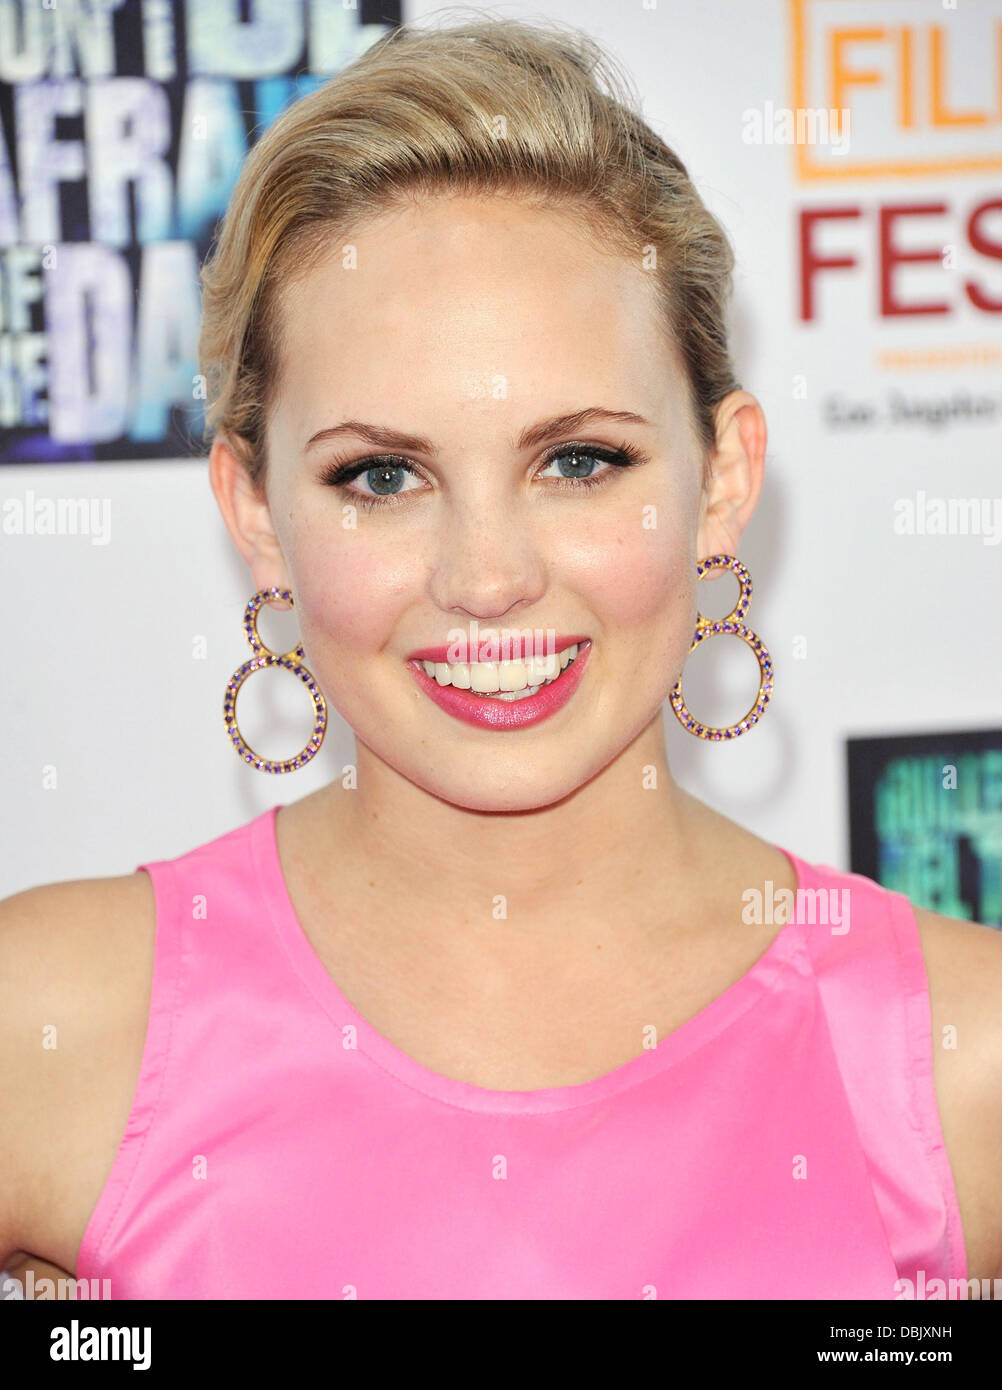 Meaghan Martin 'Don't Be Afraid of the Dark' Premiere at 2011 LAFF at Regal Cinemas L.A. Live - Arrivals Los Angeles, California - 26.06.11 Stock Photo